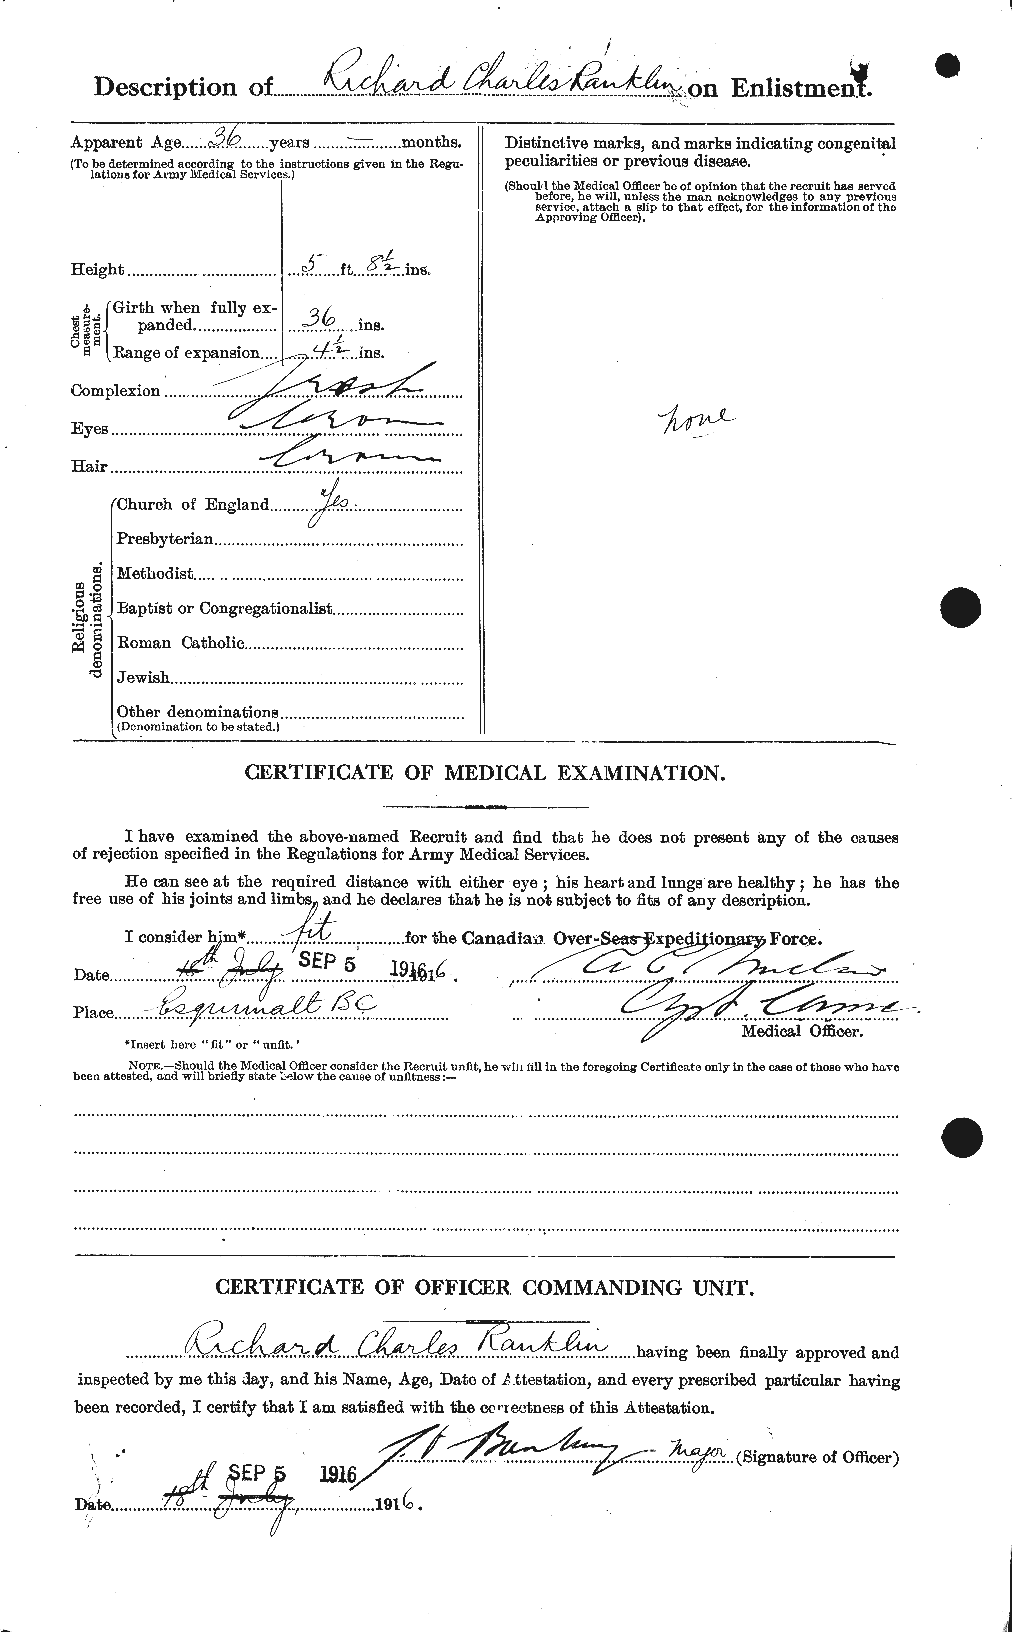 Personnel Records of the First World War - CEF 594842b